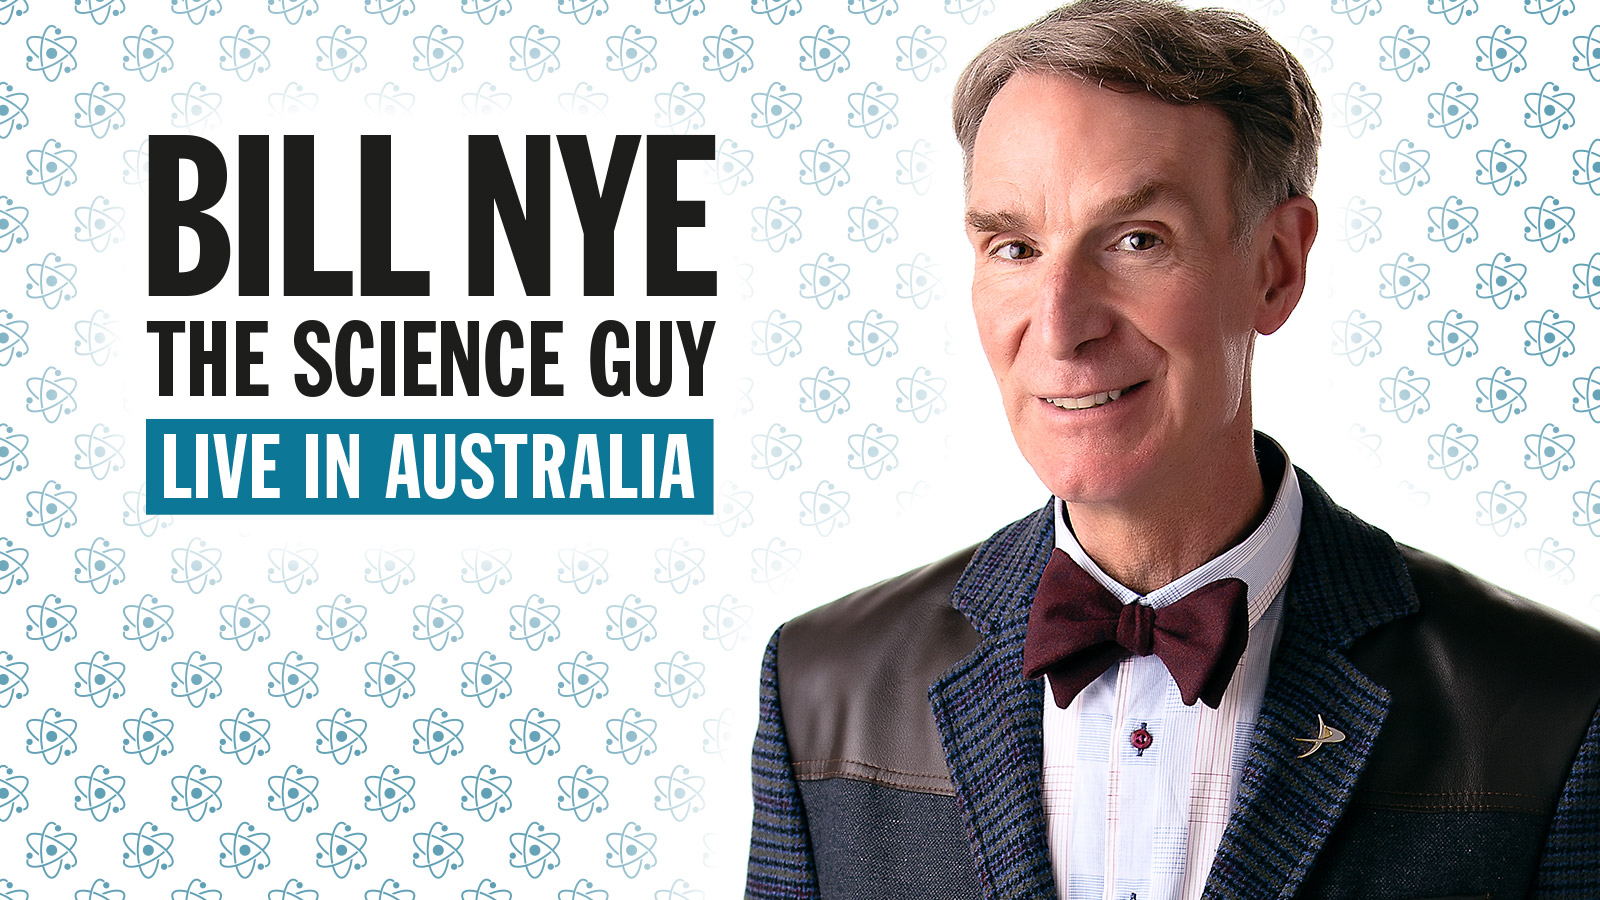 I Failed Year 9 Science But Interviewed Bill Nye the Science Guy